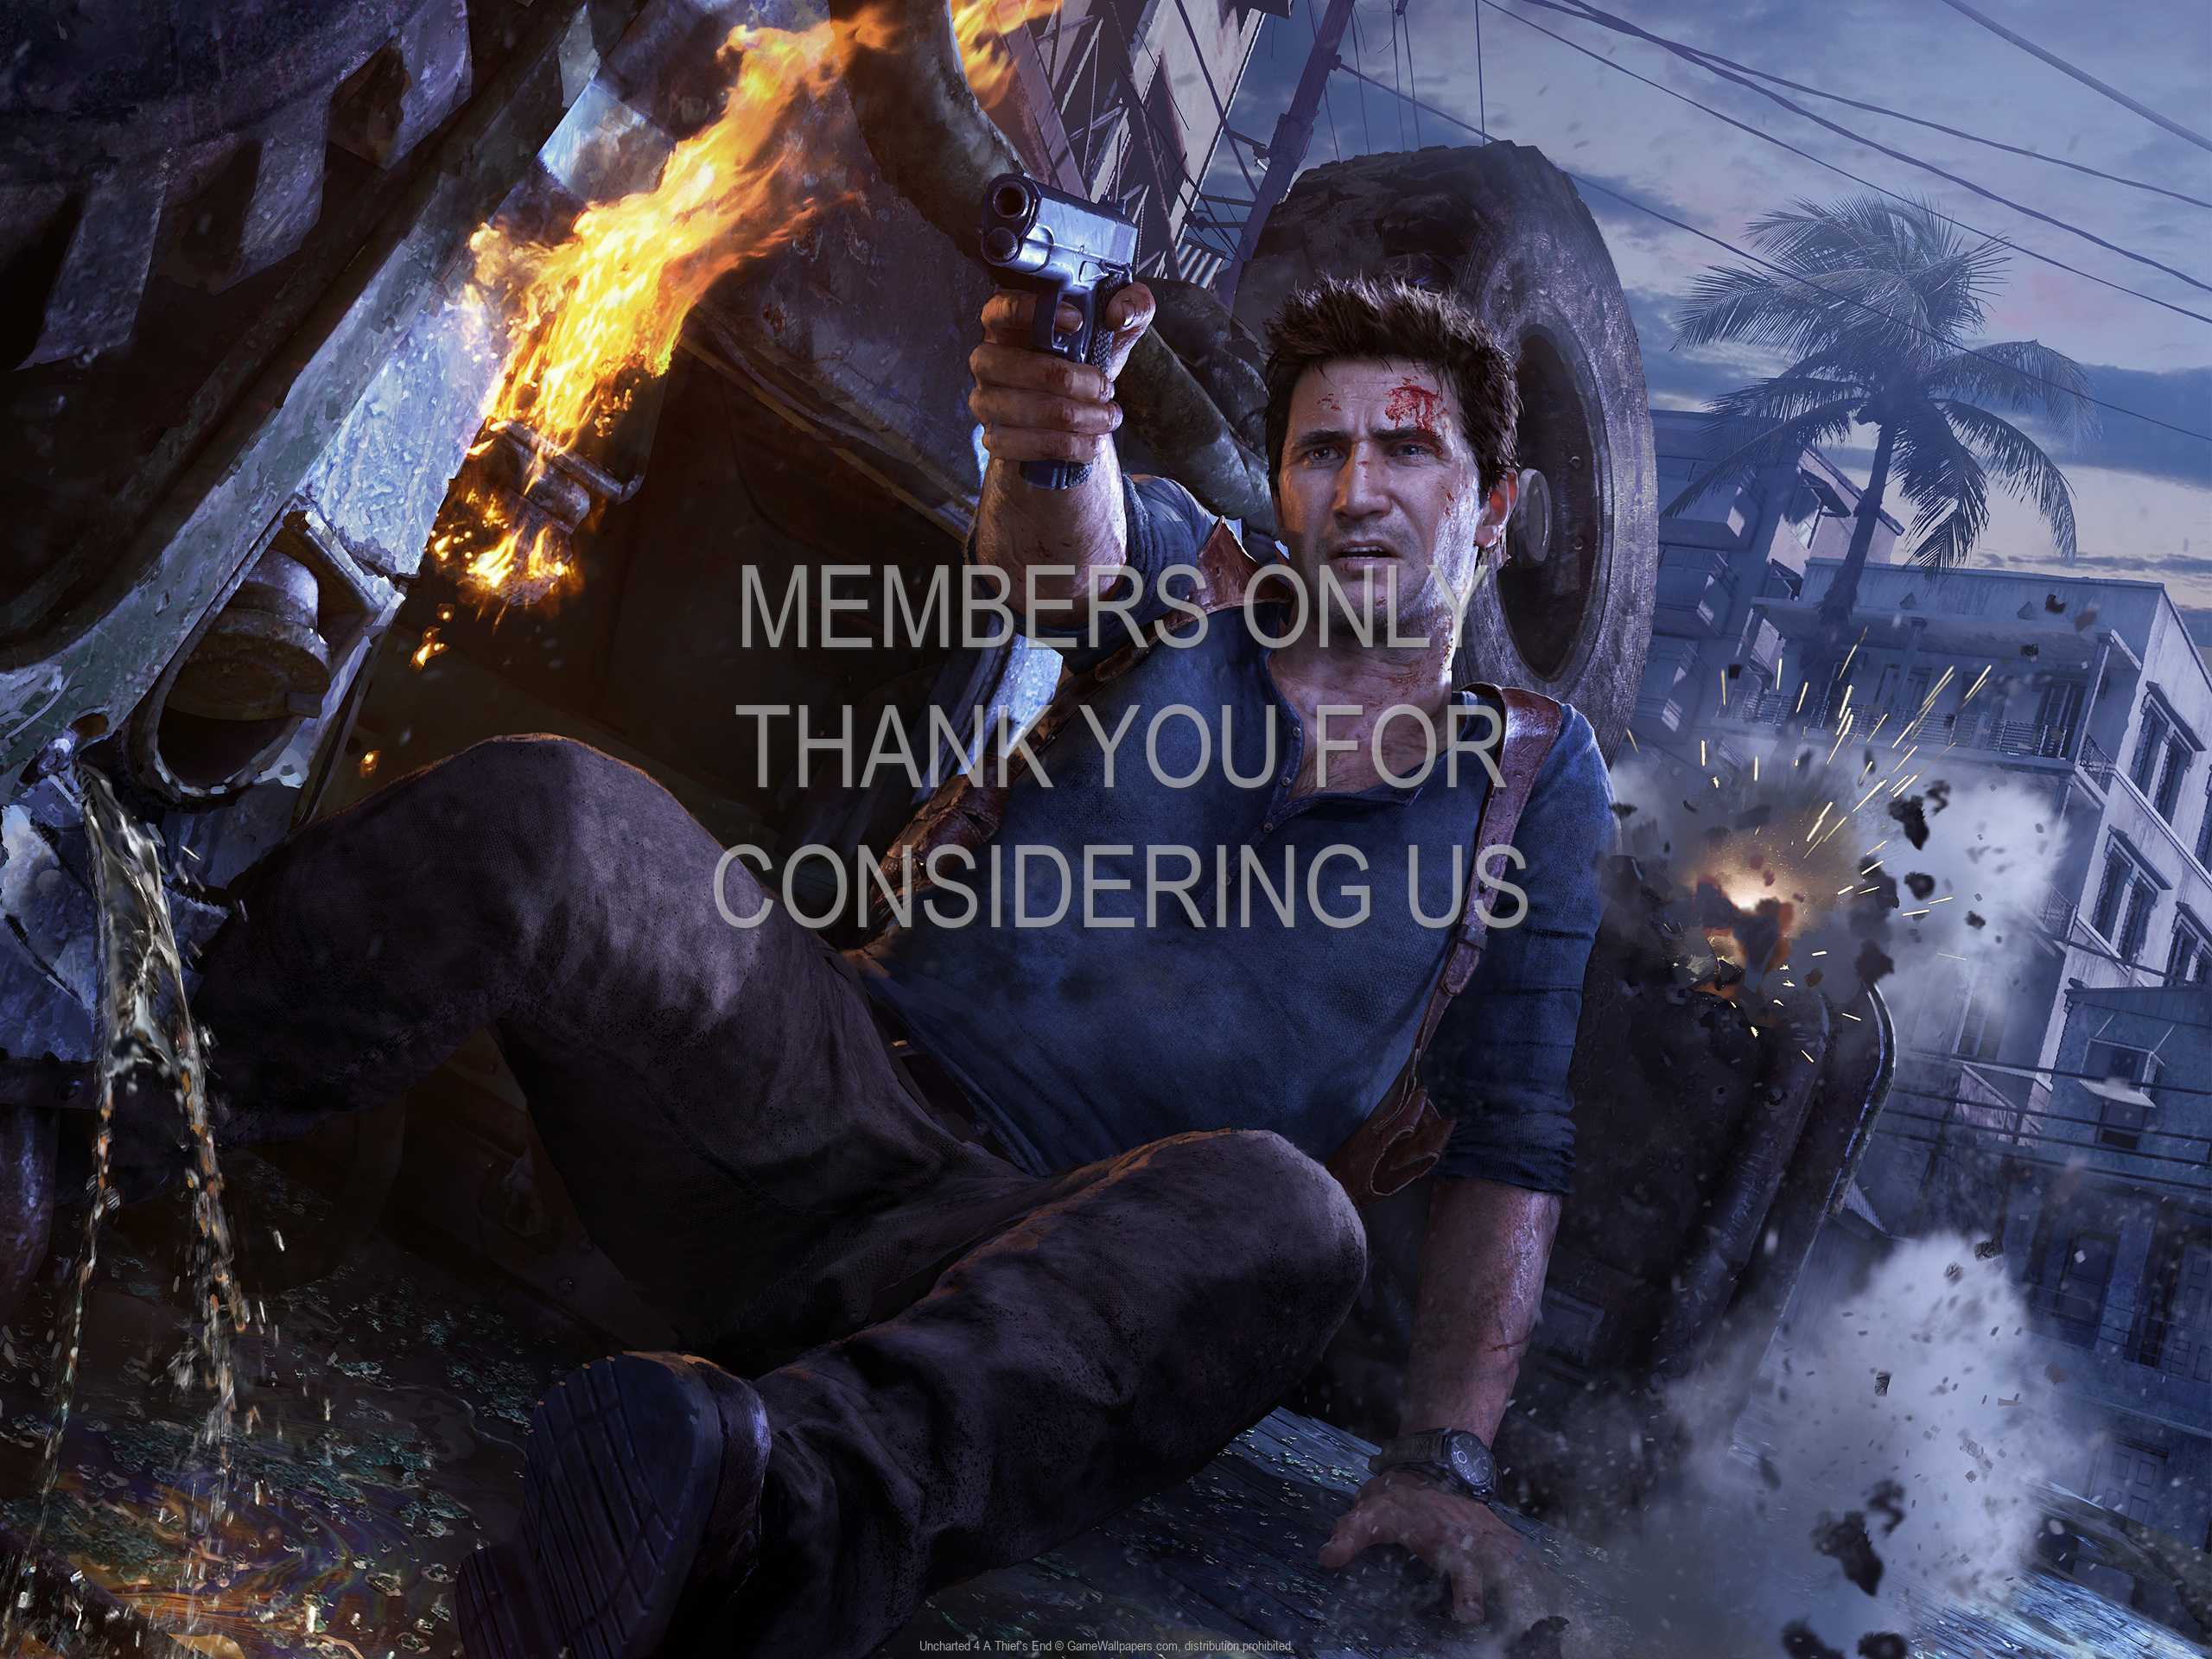 Uncharted 4: A Thief's End 1080p Horizontal Mobile fond d'cran 04